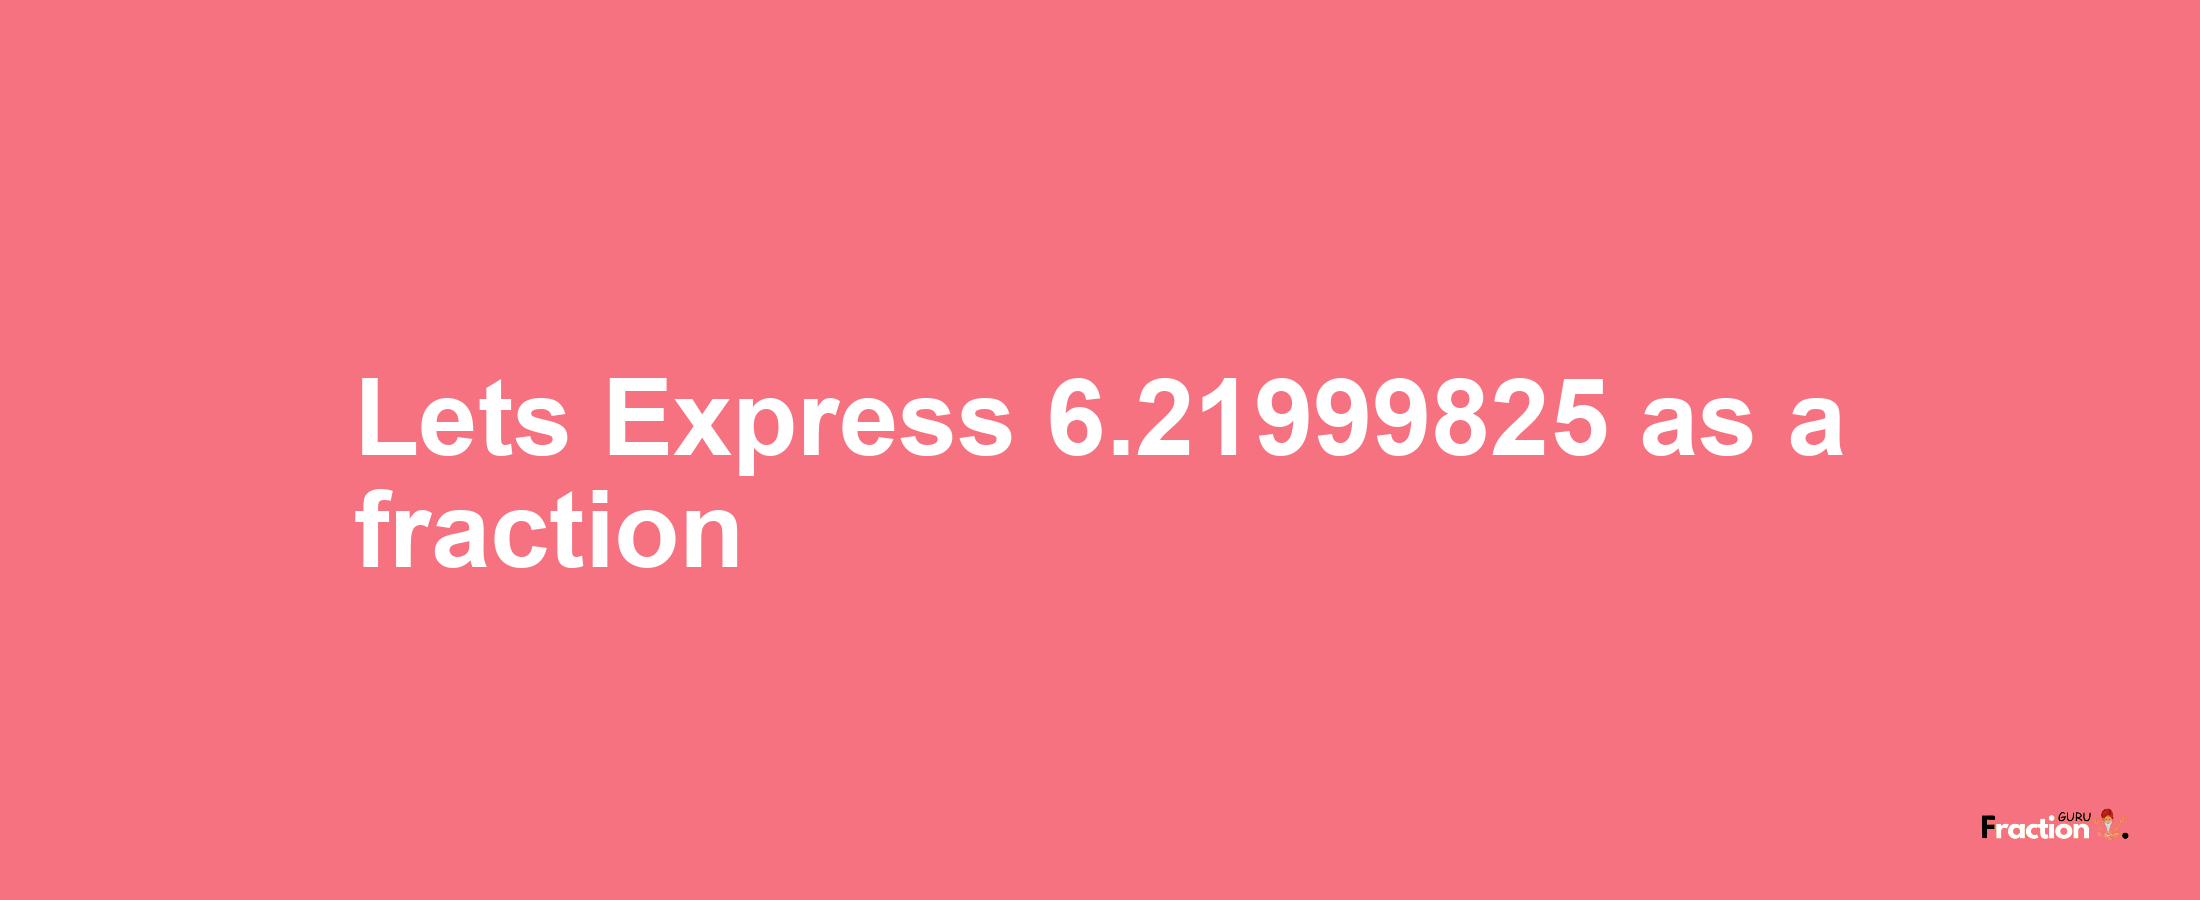 Lets Express 6.21999825 as afraction